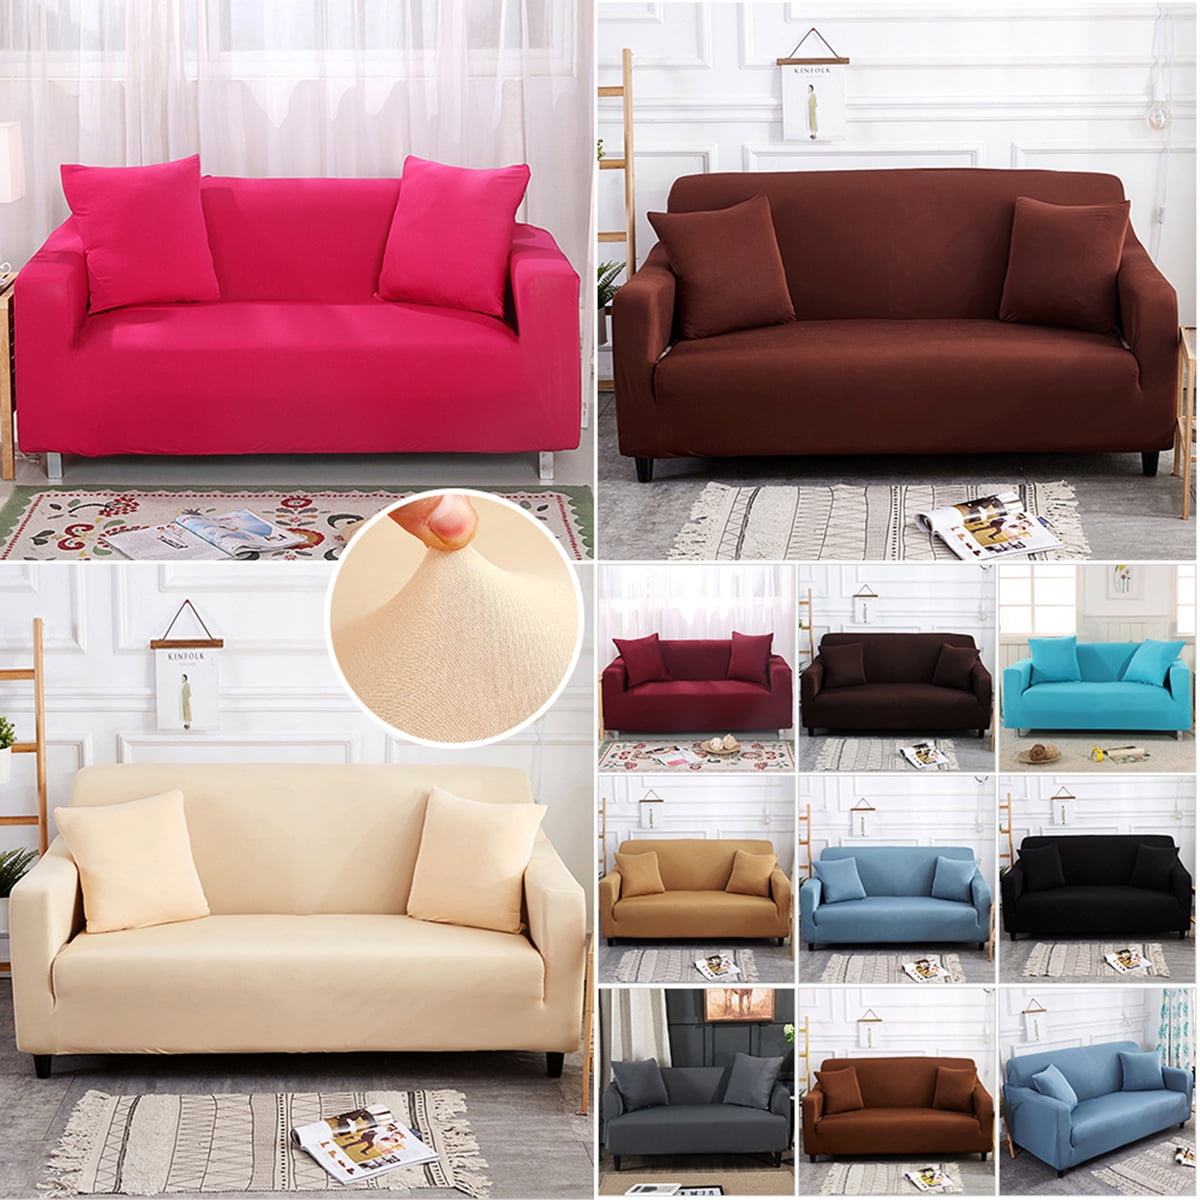 Details about   1 2 3 4 Seater Stretch Slipcover Chair Loveseat Sofa Couch Solid Elastic Cover 